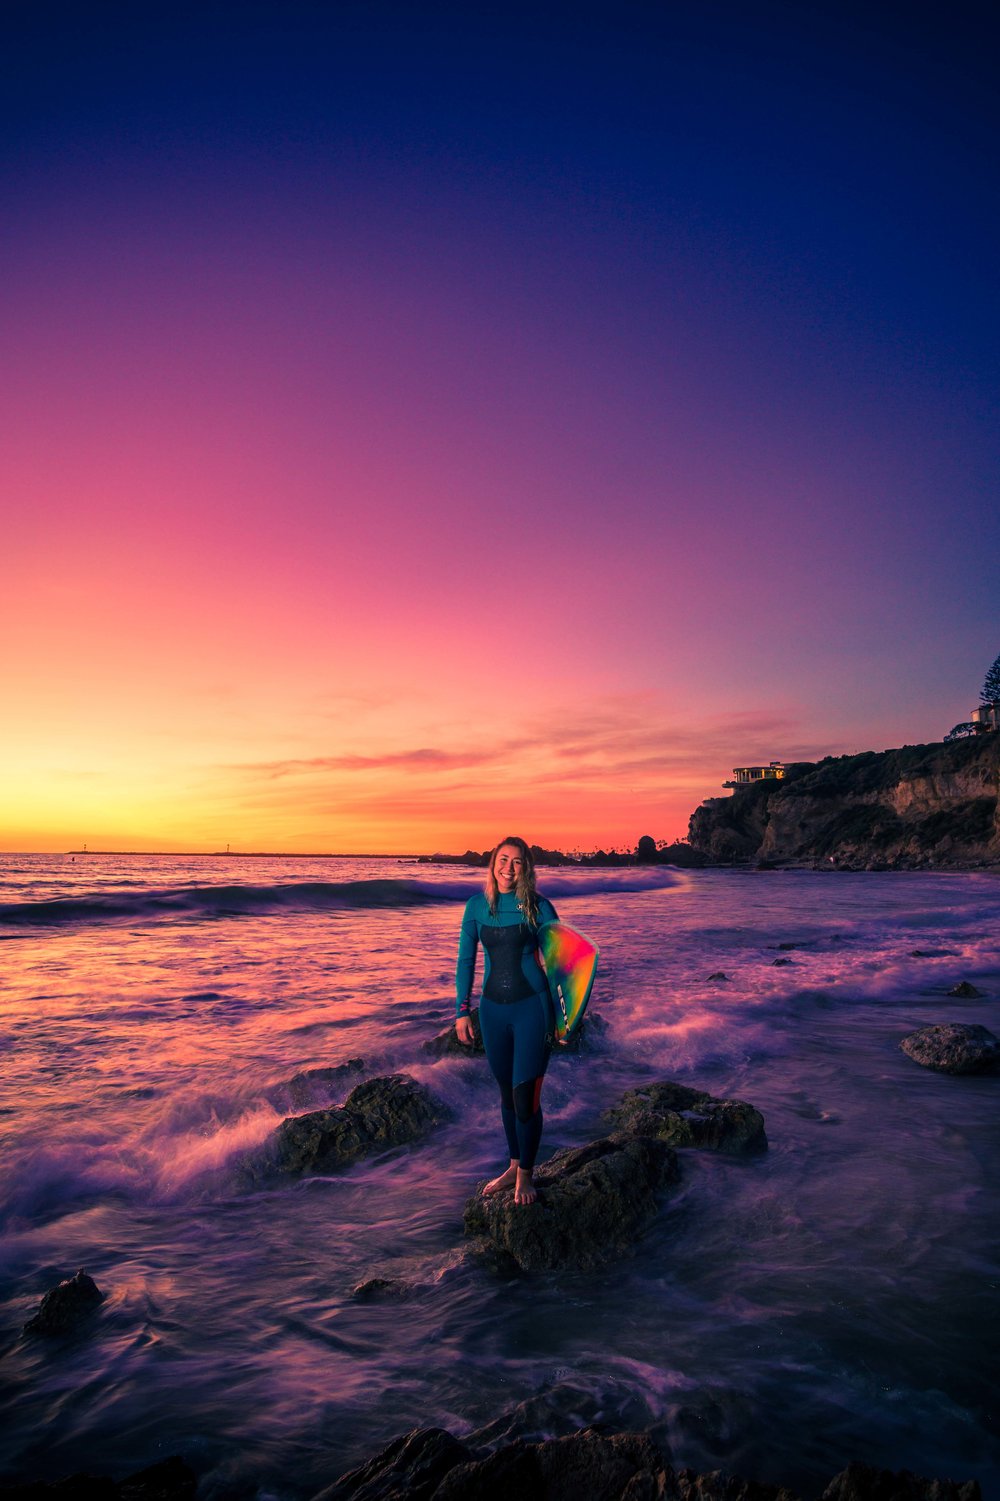 A portrait of a surfer girl at little corona beach with her standing on the tidepool rocks with the waves breaking during a beautiful purple sunset